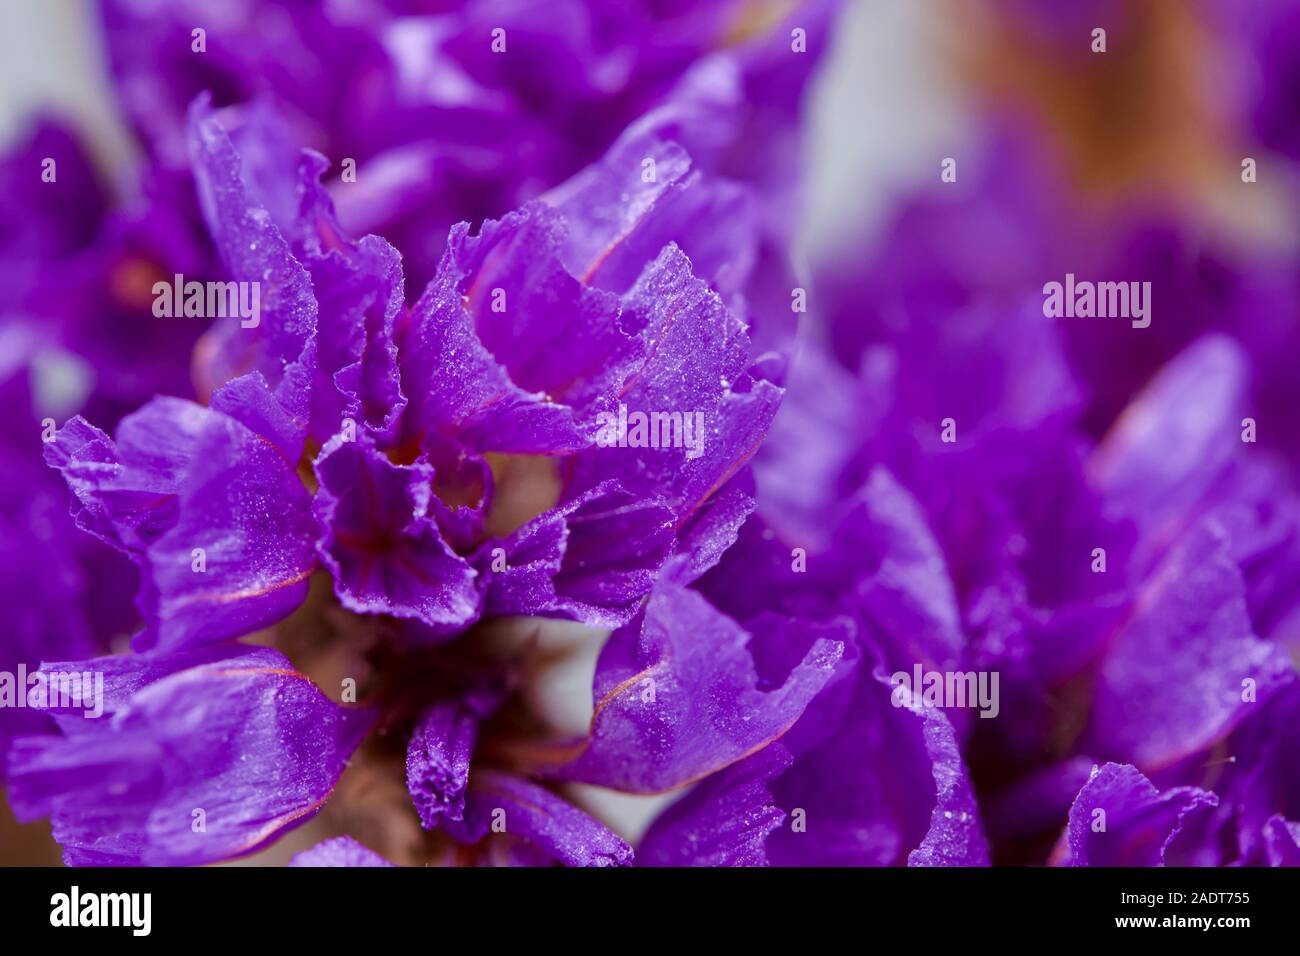 Macro abstract view of dried sea lavender (limonium) flower blossoms on a white background Stock Photo